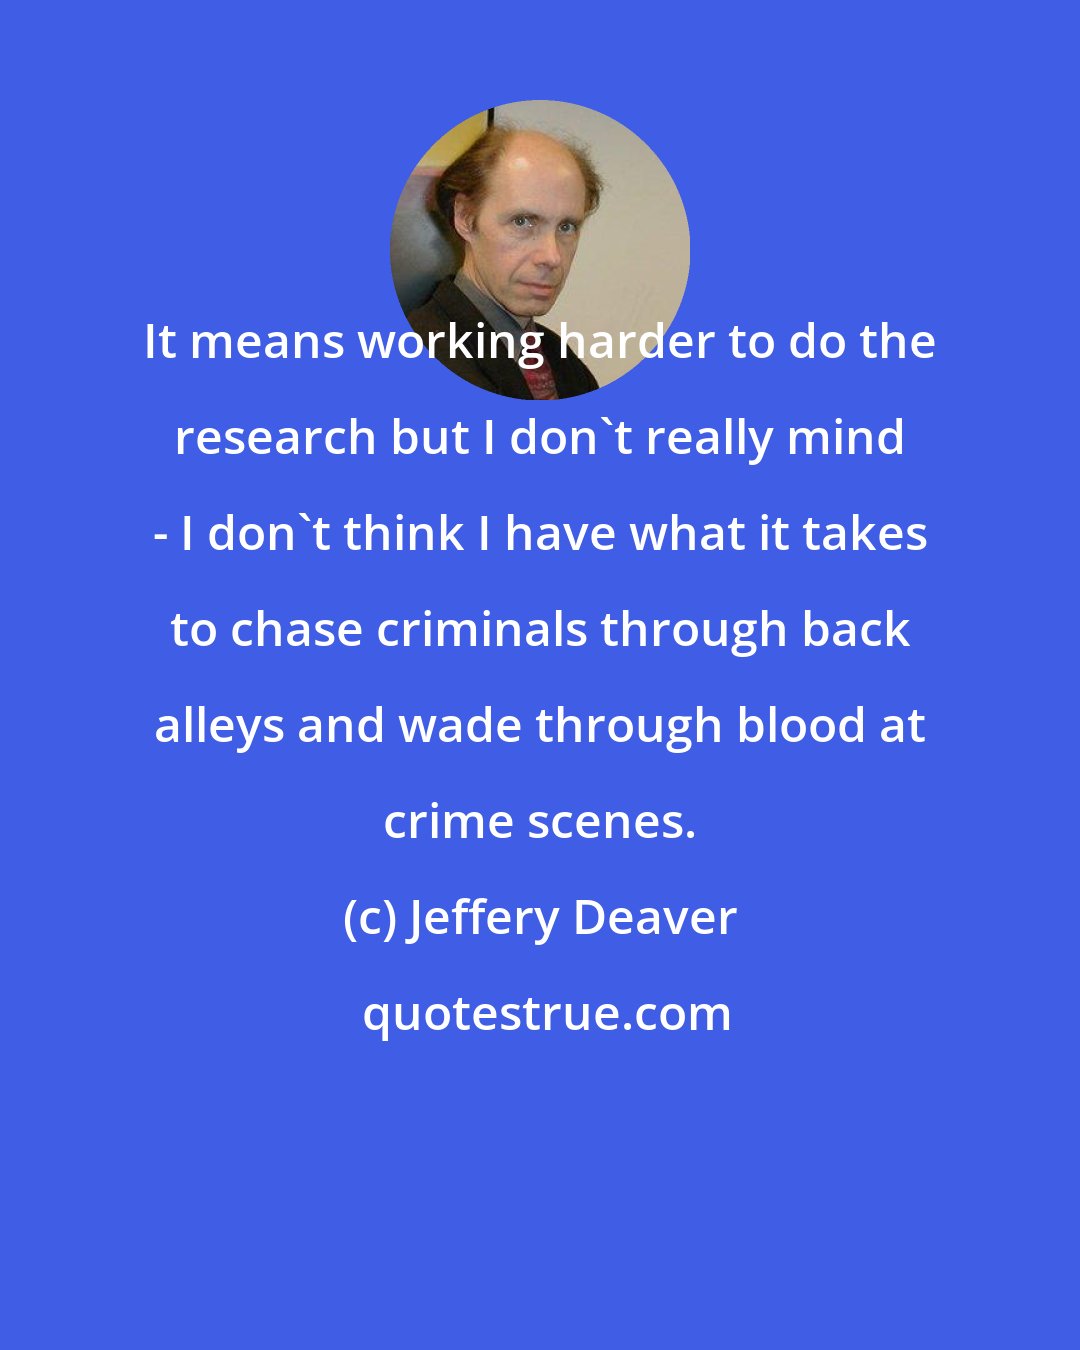 Jeffery Deaver: It means working harder to do the research but I don't really mind - I don't think I have what it takes to chase criminals through back alleys and wade through blood at crime scenes.